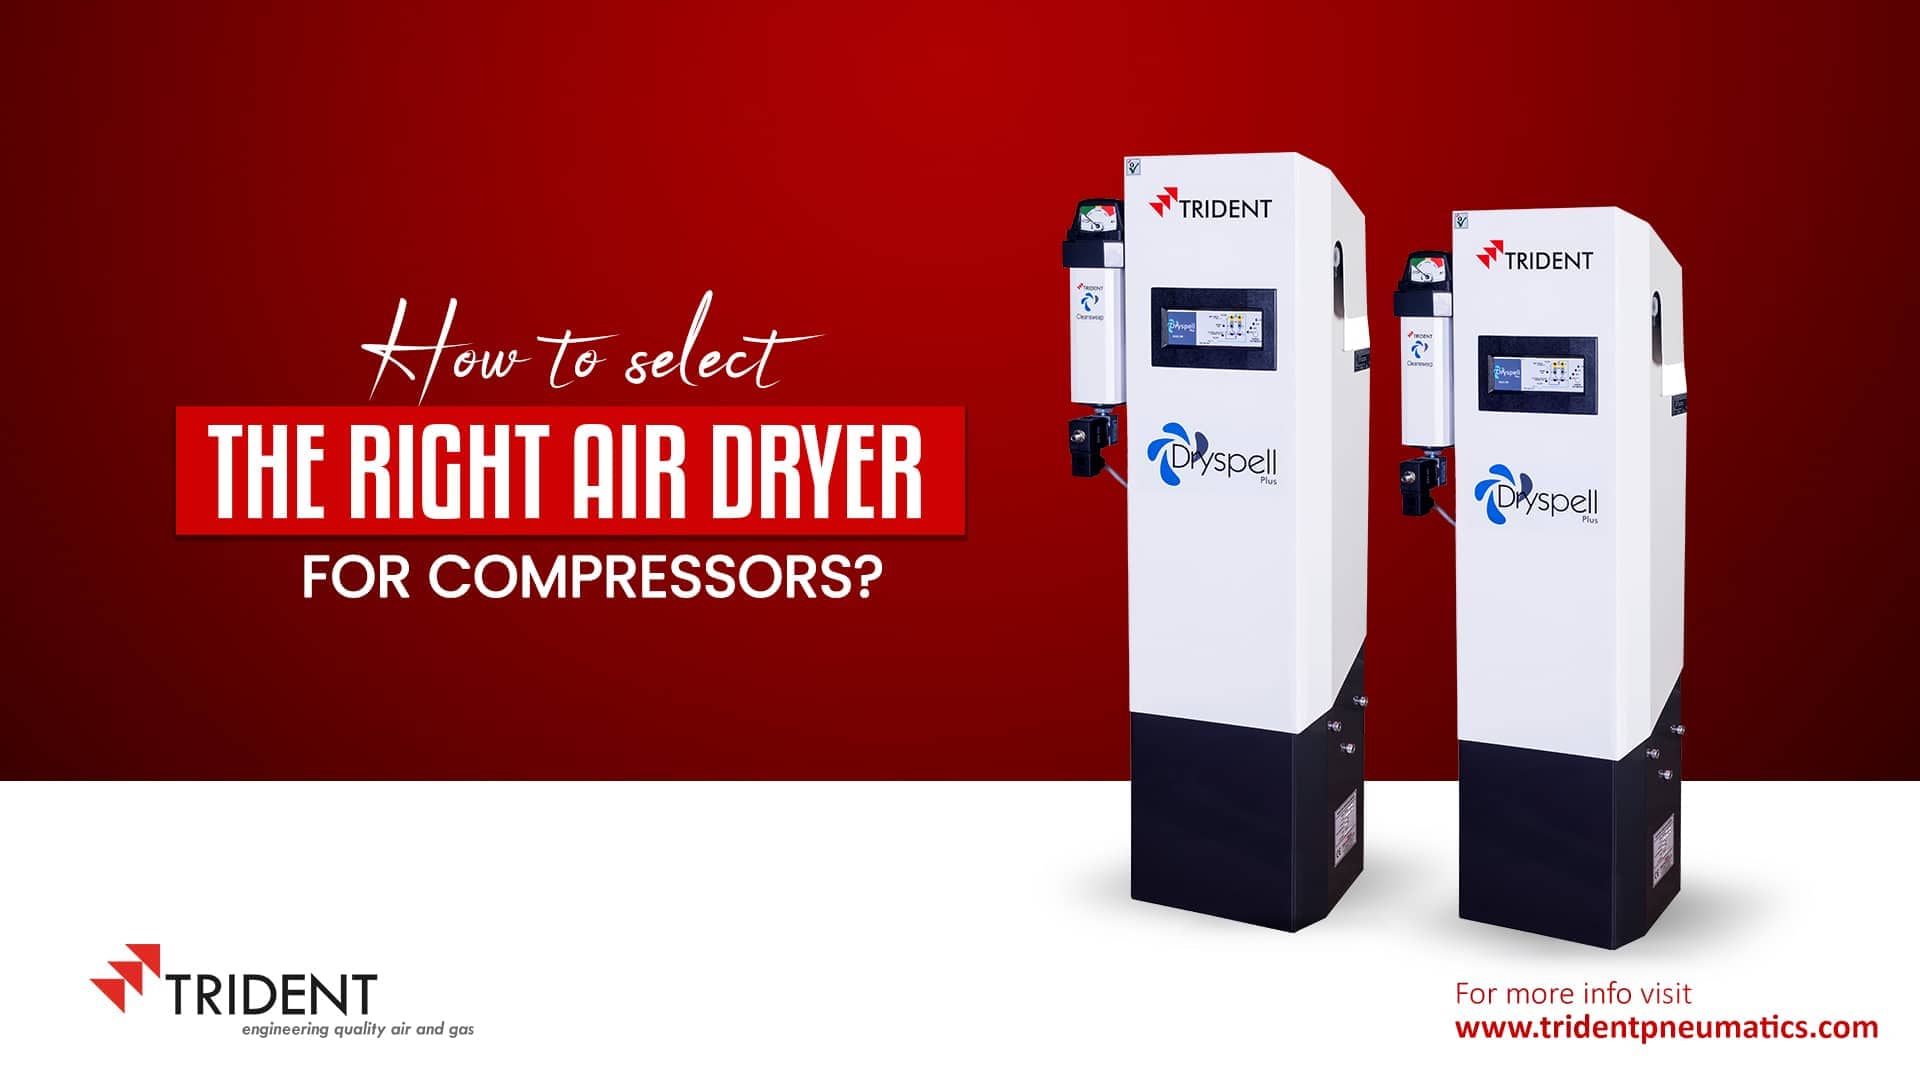 Compressed Air Dryer Manufacturers